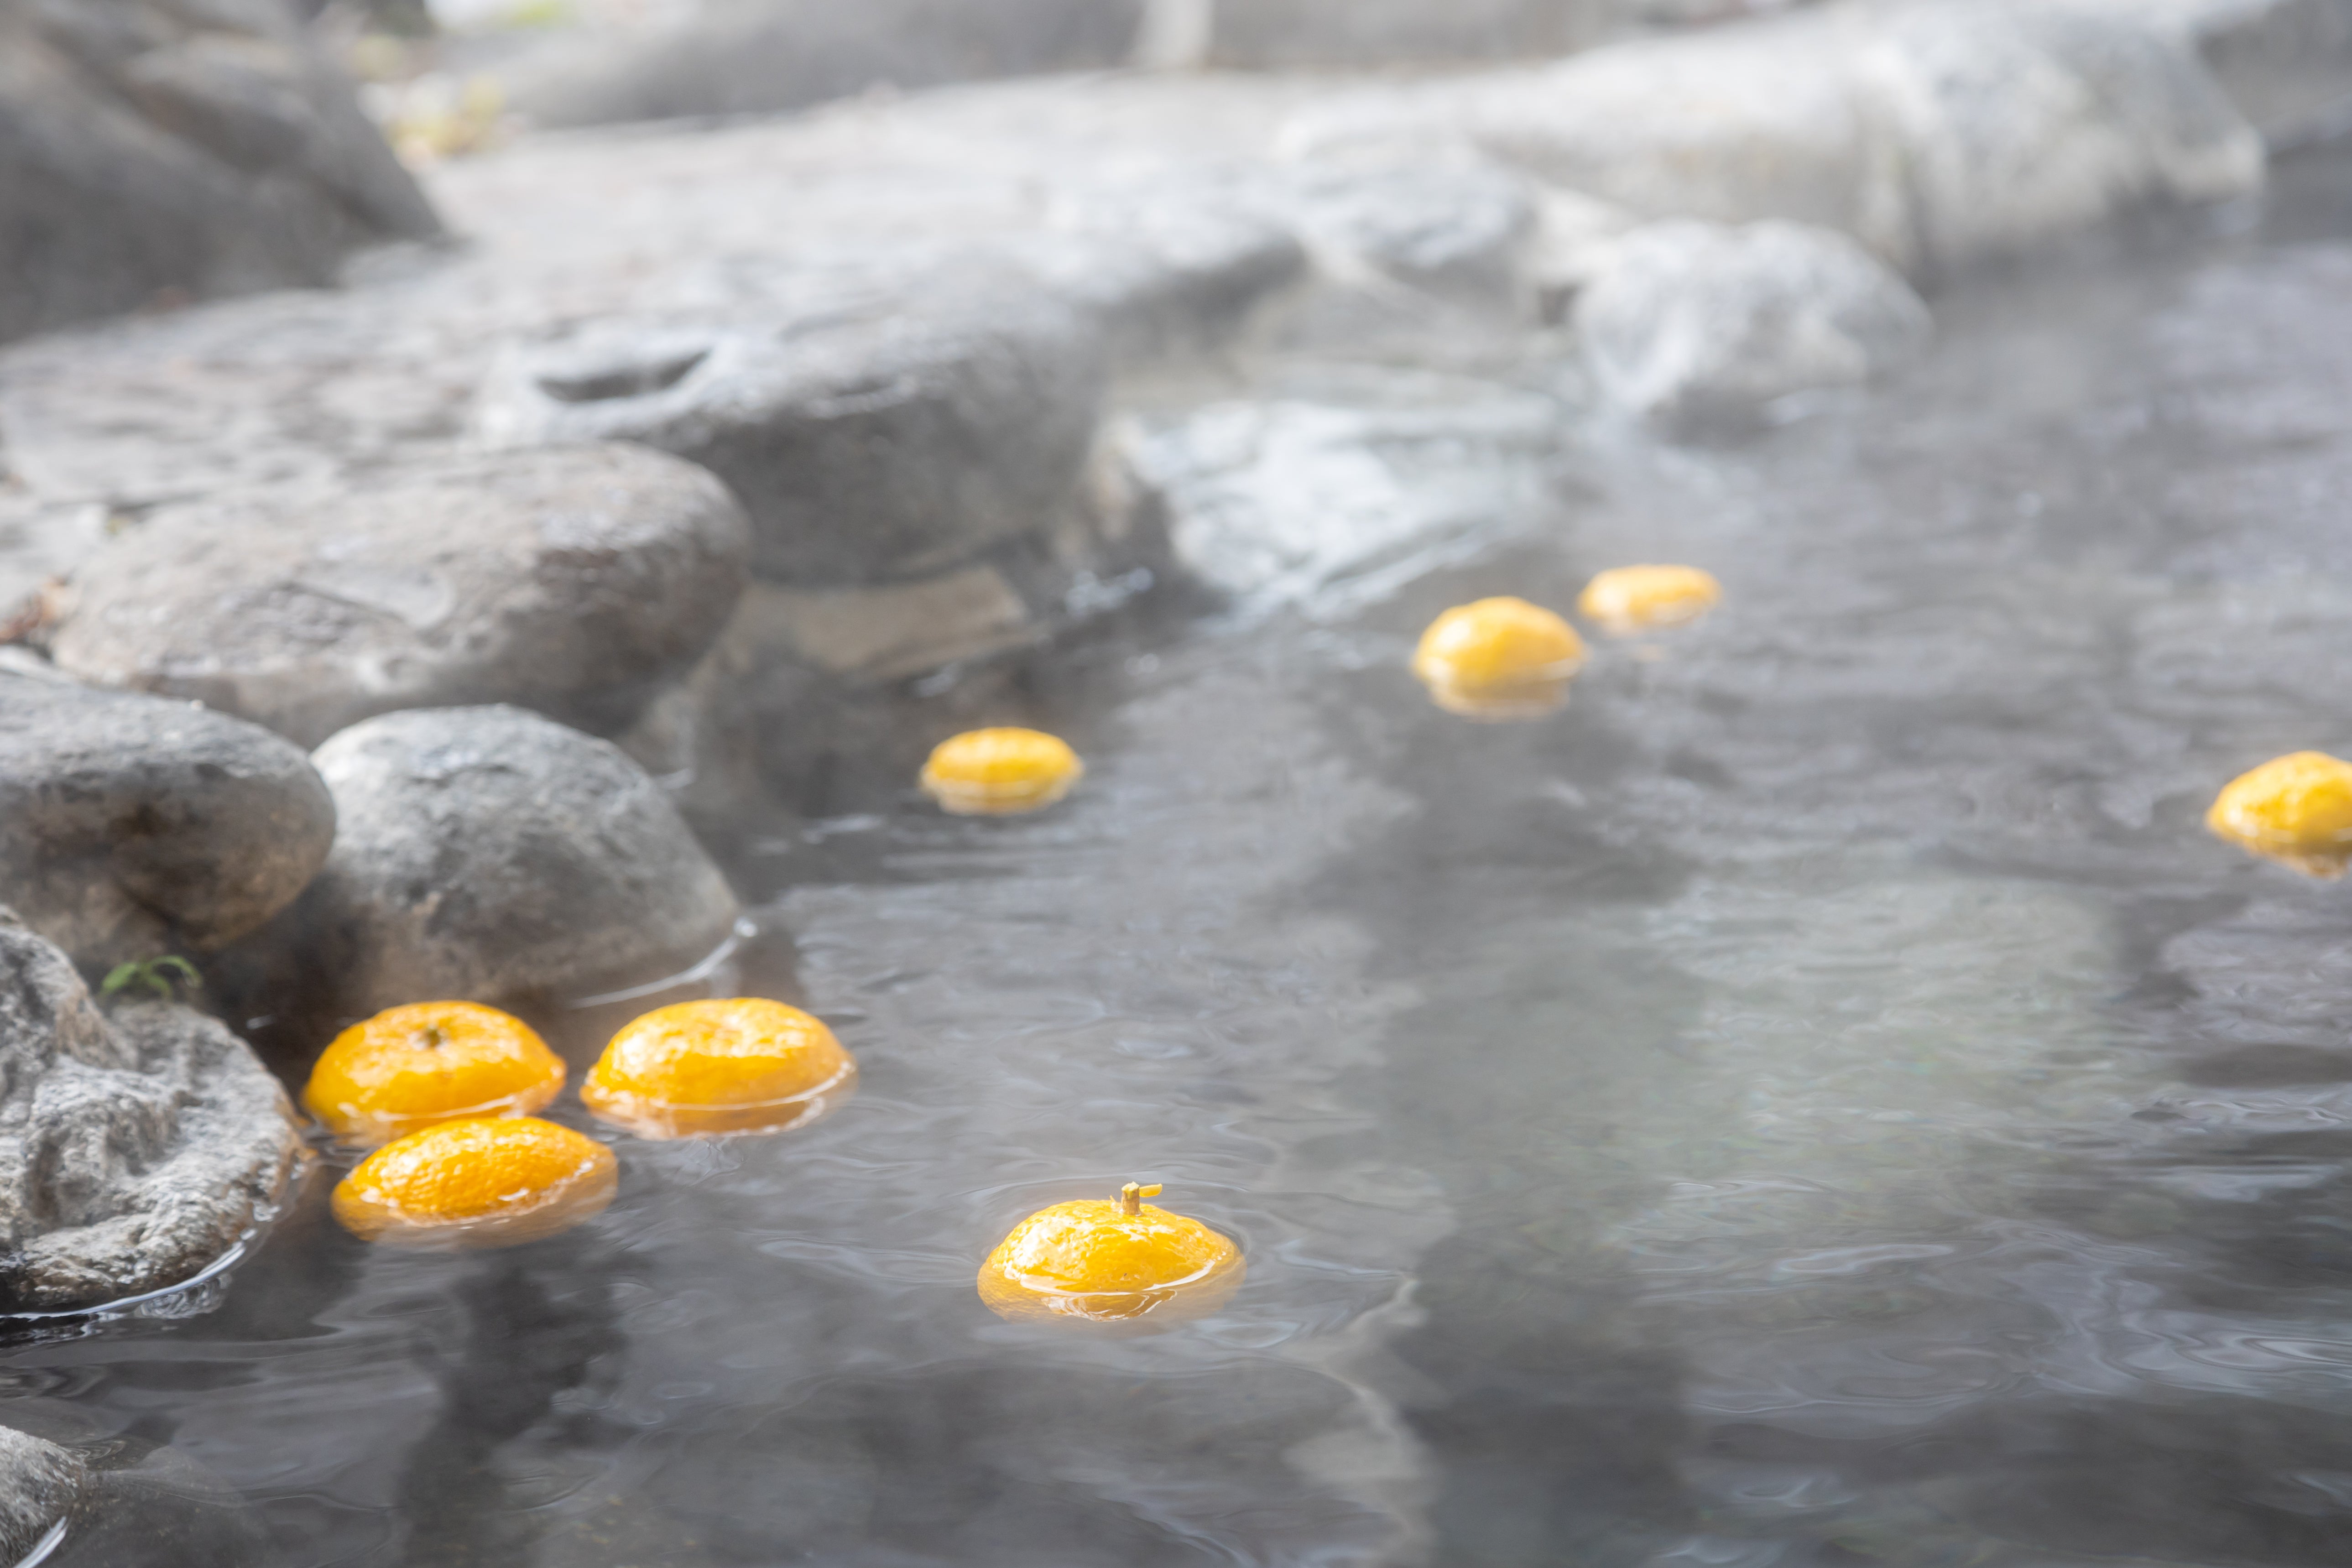 Citrus fruits in onsen can have added health benefits